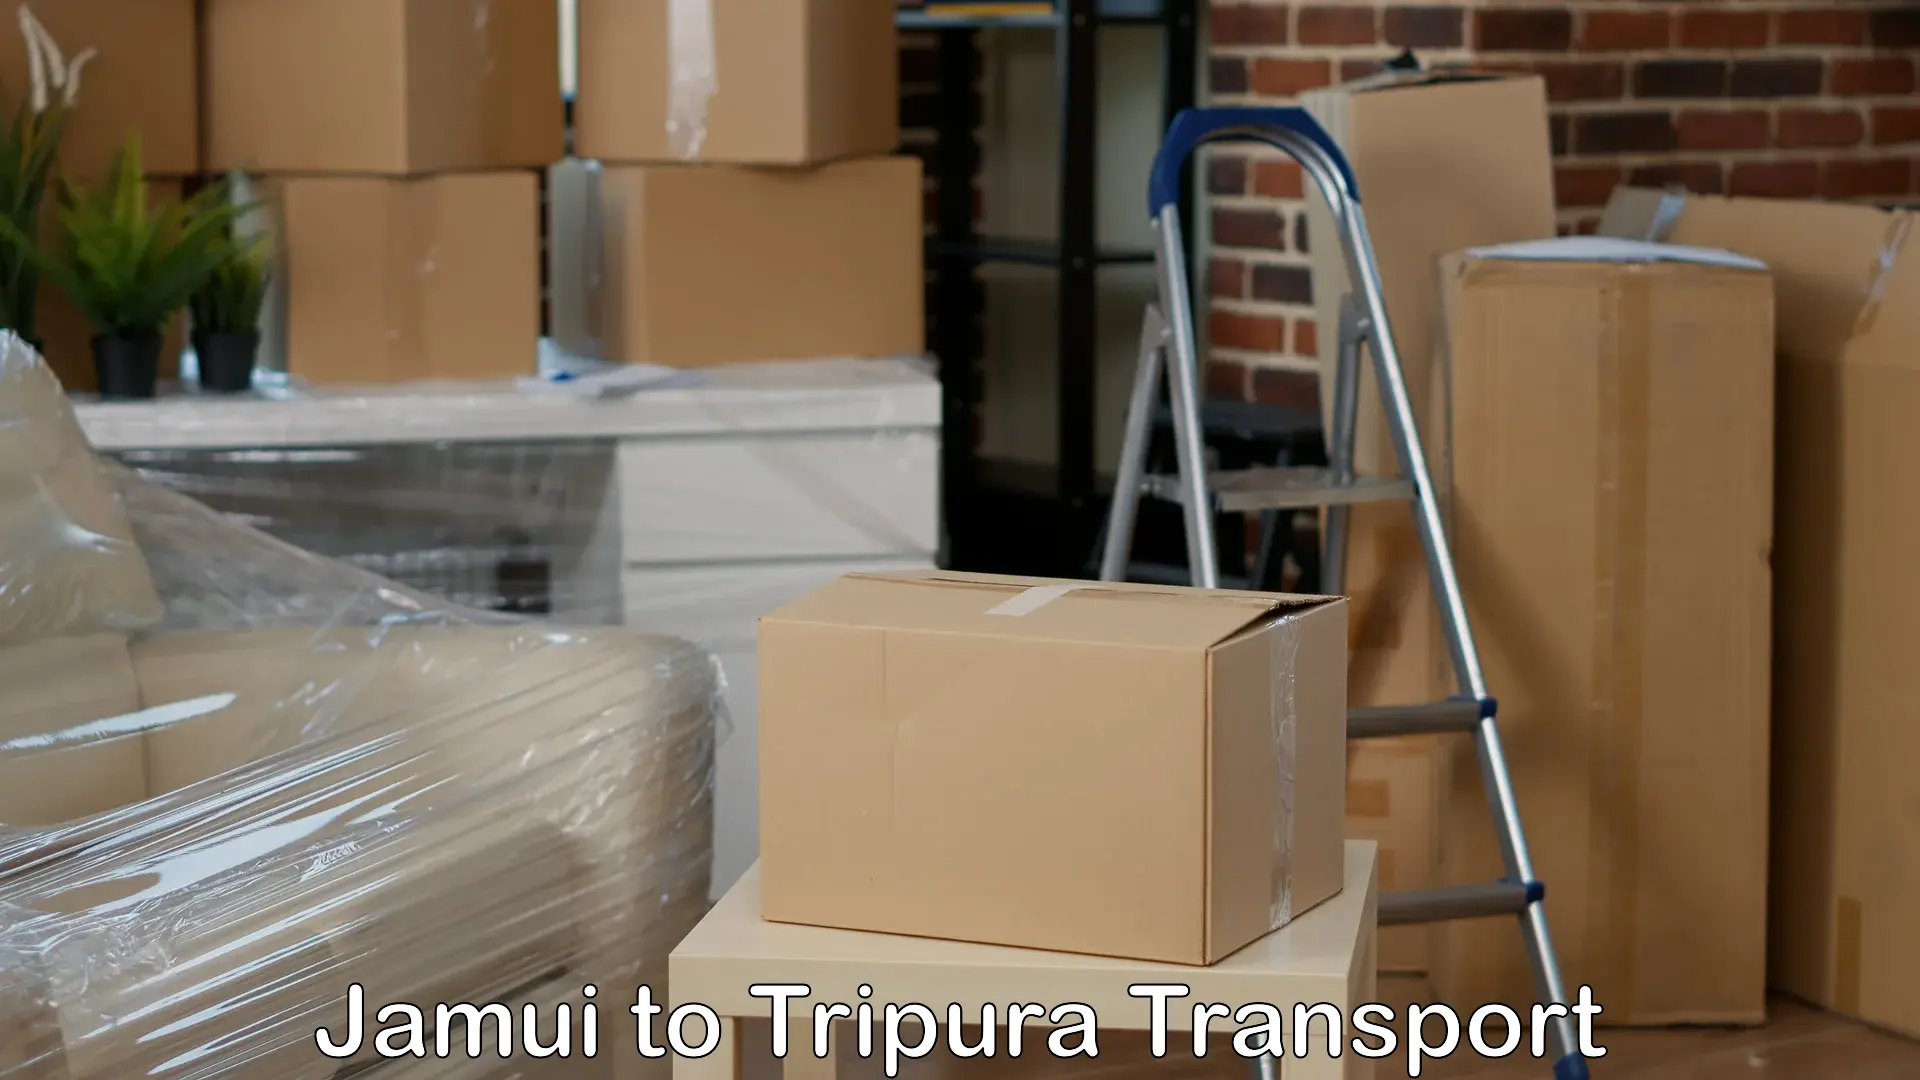 Two wheeler transport services in Jamui to Udaipur Tripura